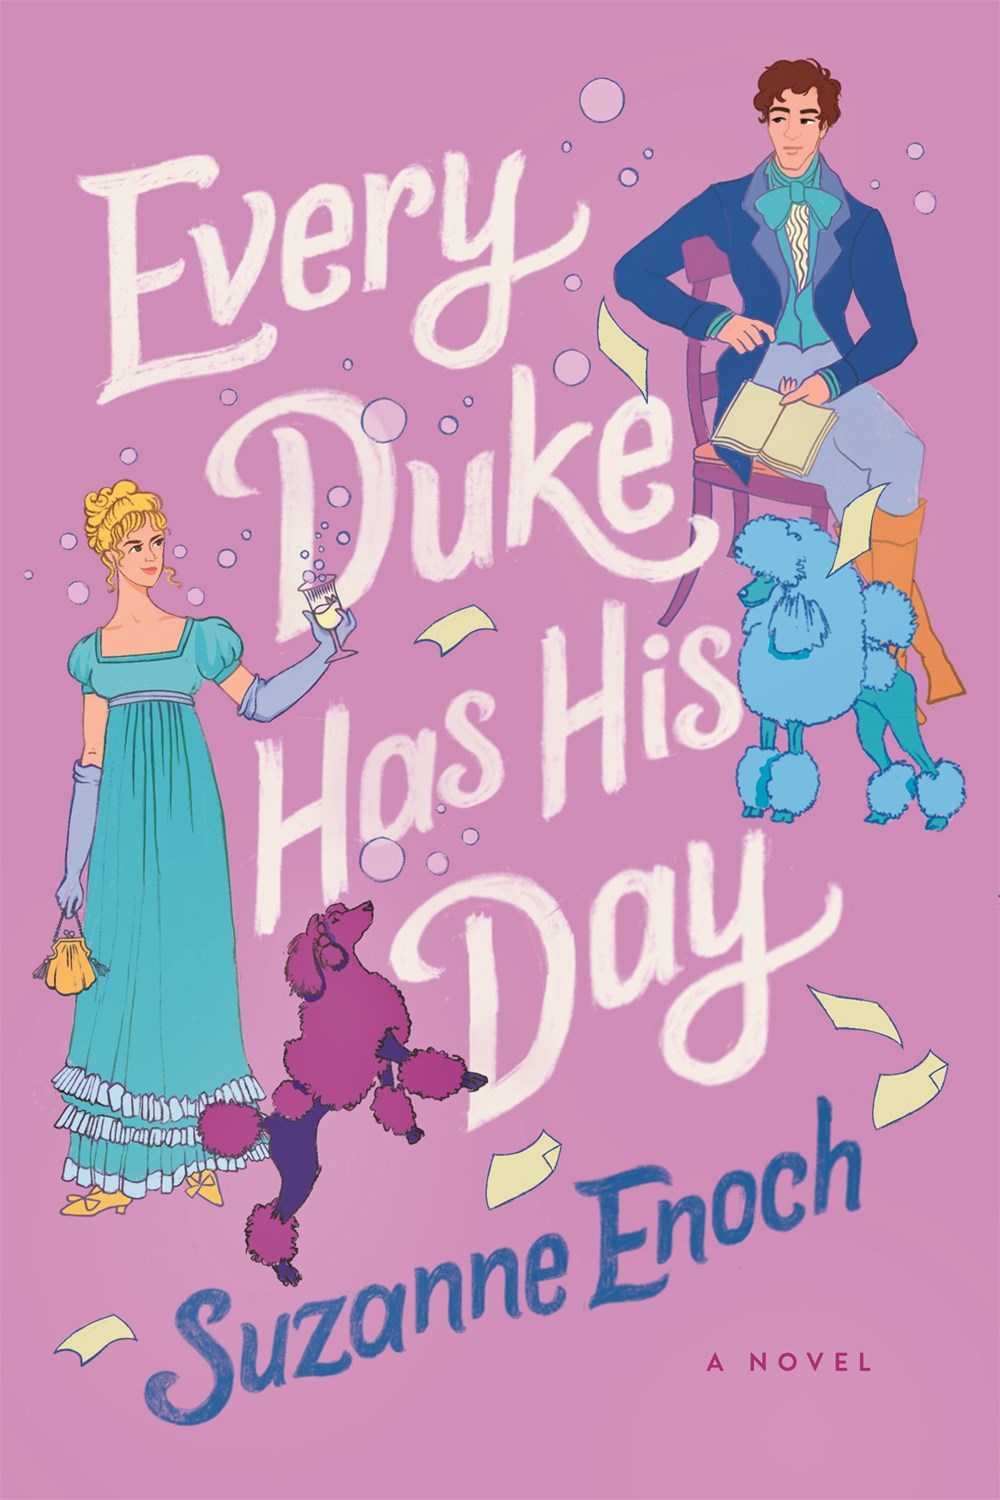 Every Duke Has His Day - Suzanne Enoch